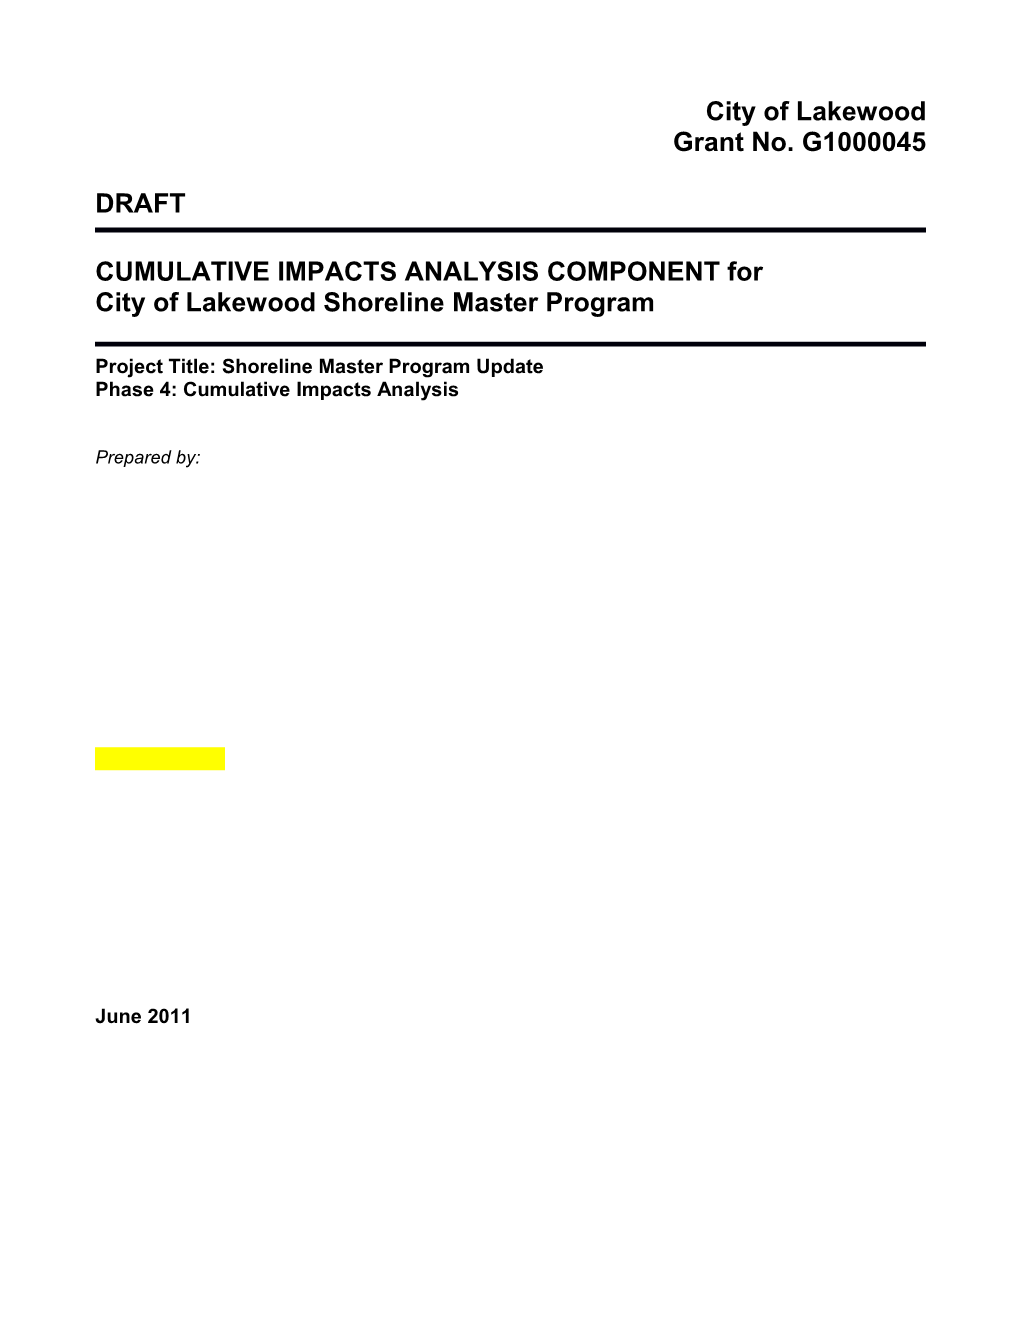 CUMULATIVE IMPACTS ANALYSIS COMPONENT For